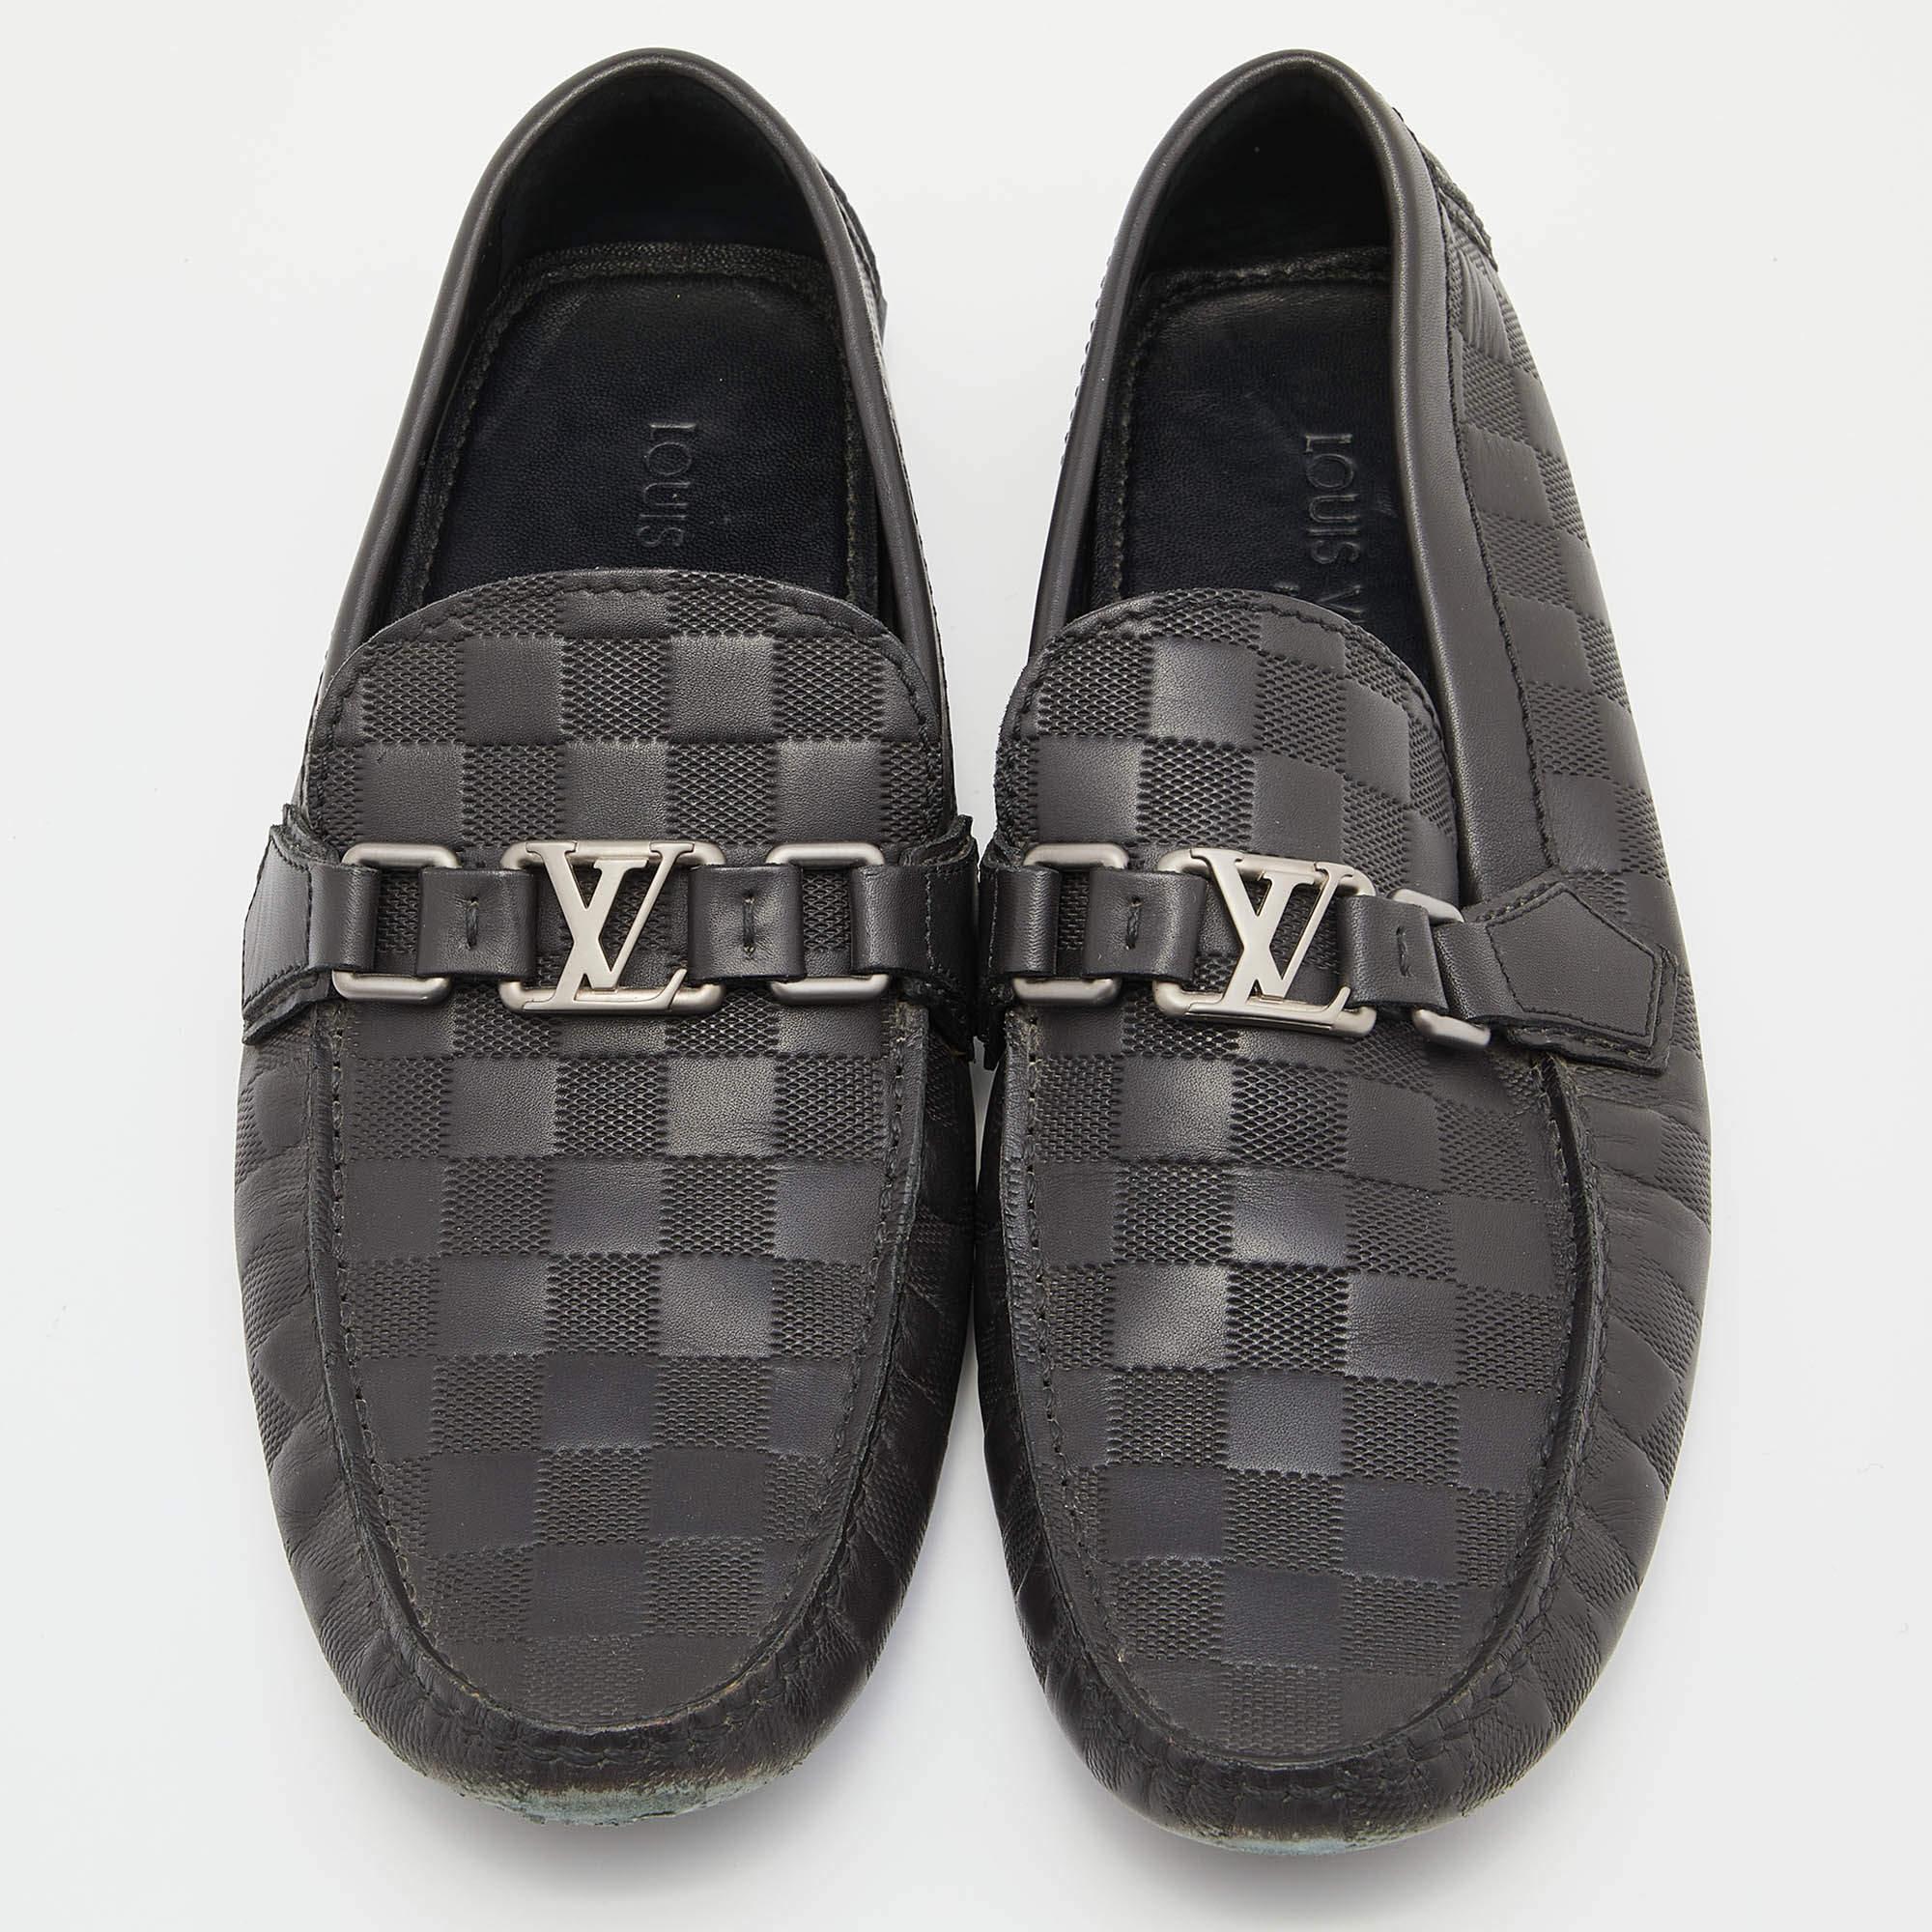 Practical, fashionable, and durable—these designer loafers are carefully built to be fine companions to your everyday style. They come made using the best materials to be a prized buy.

Includes: Original Box

